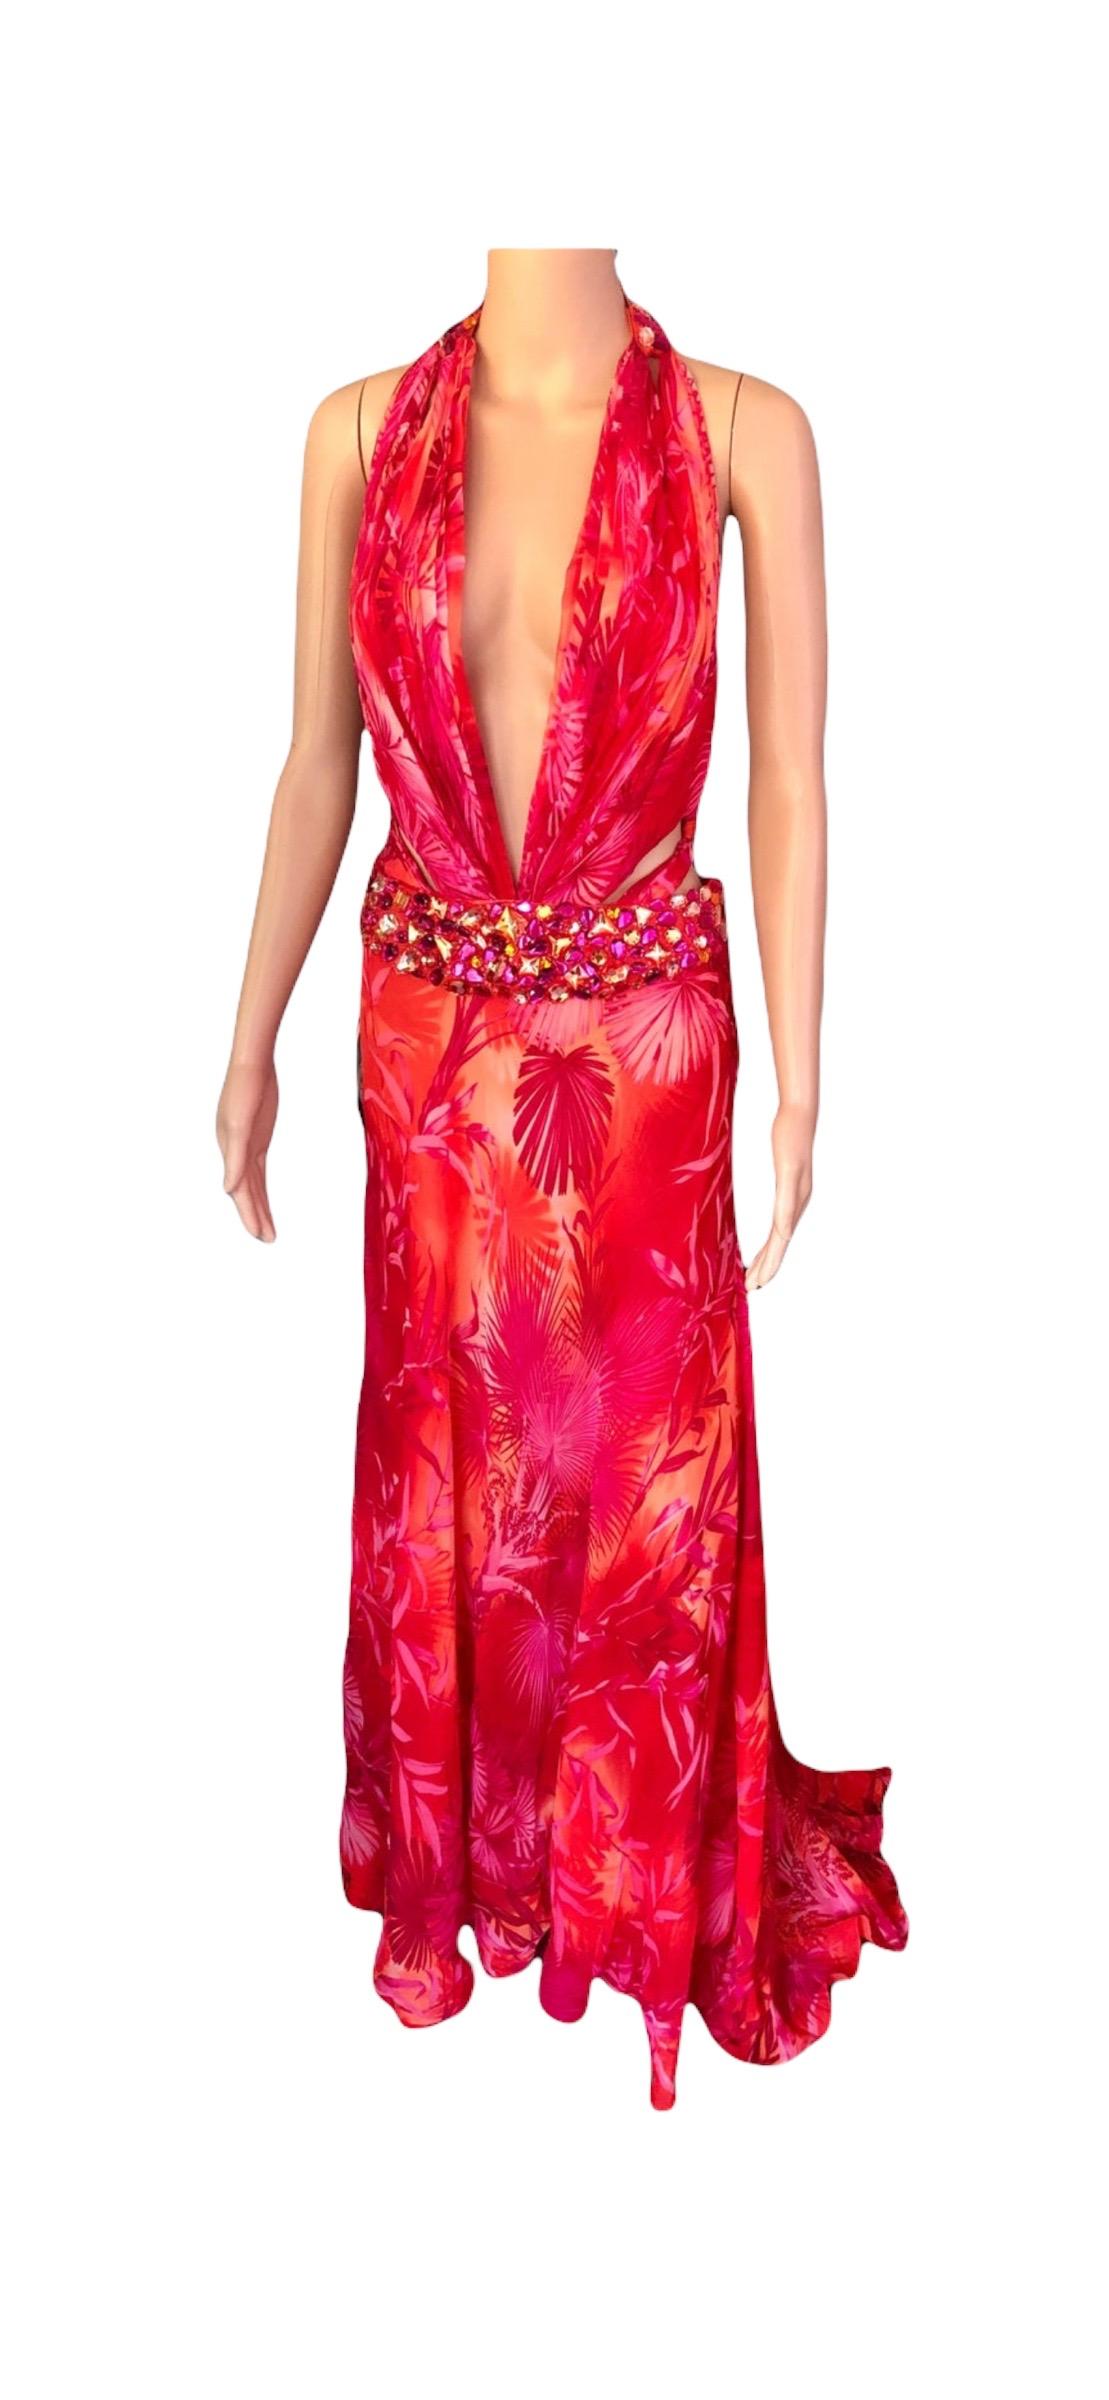 Gianni Versace S/S 2000 Runway Embellished Jungle Print Evening Dress Gown For Sale 4